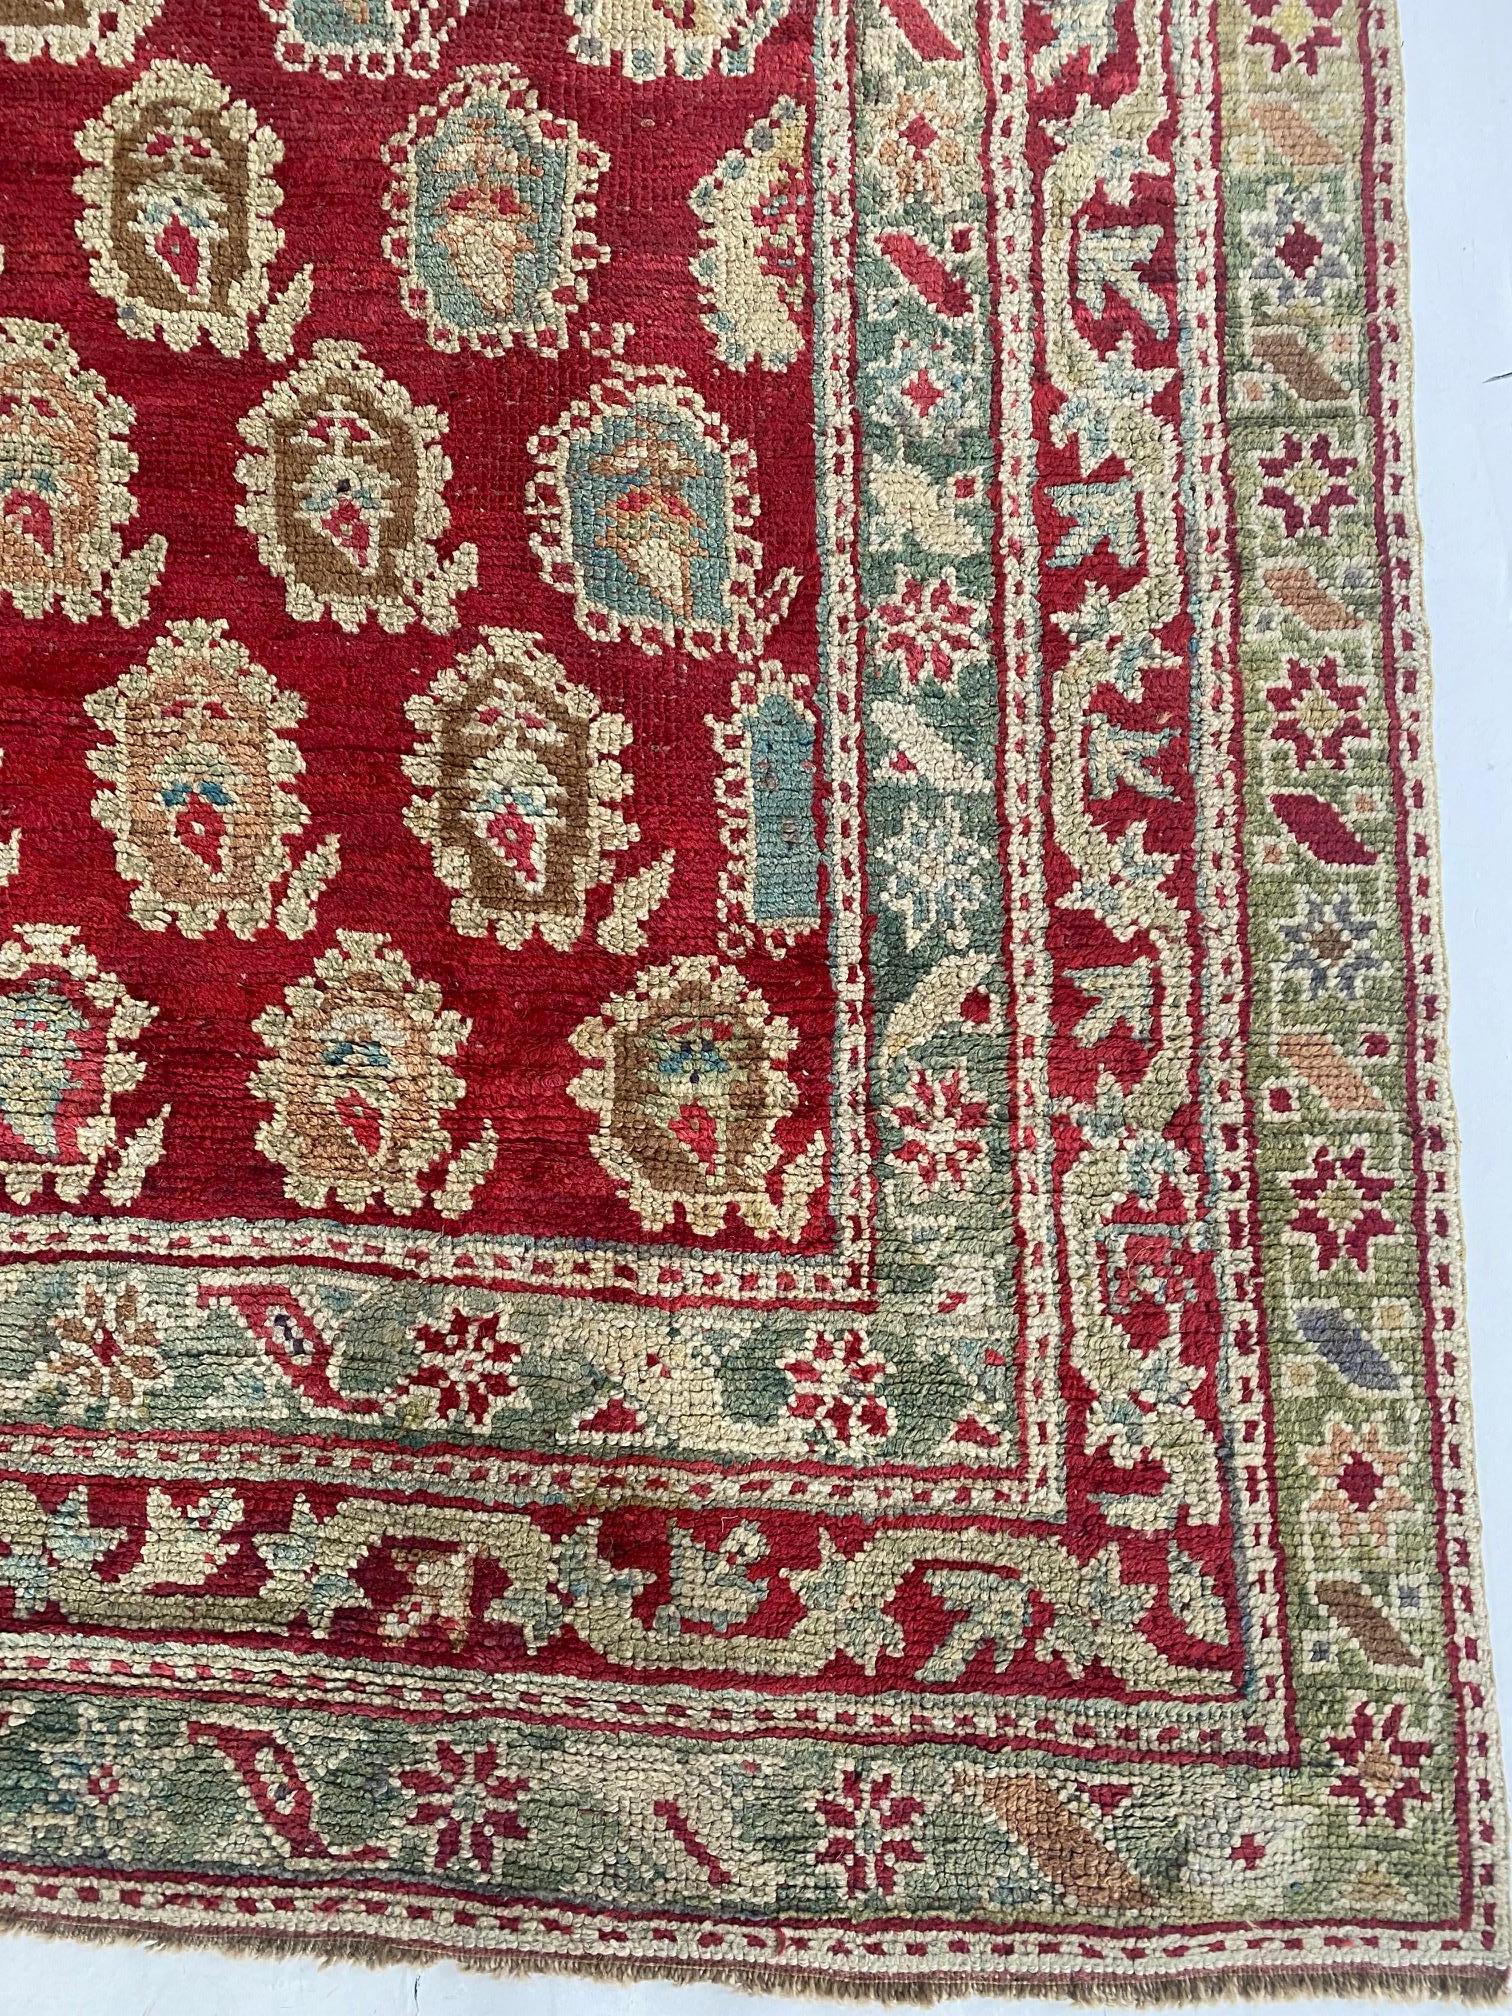 Hand-Woven 19th Century Turkish Oushak Red Wool Carpet For Sale